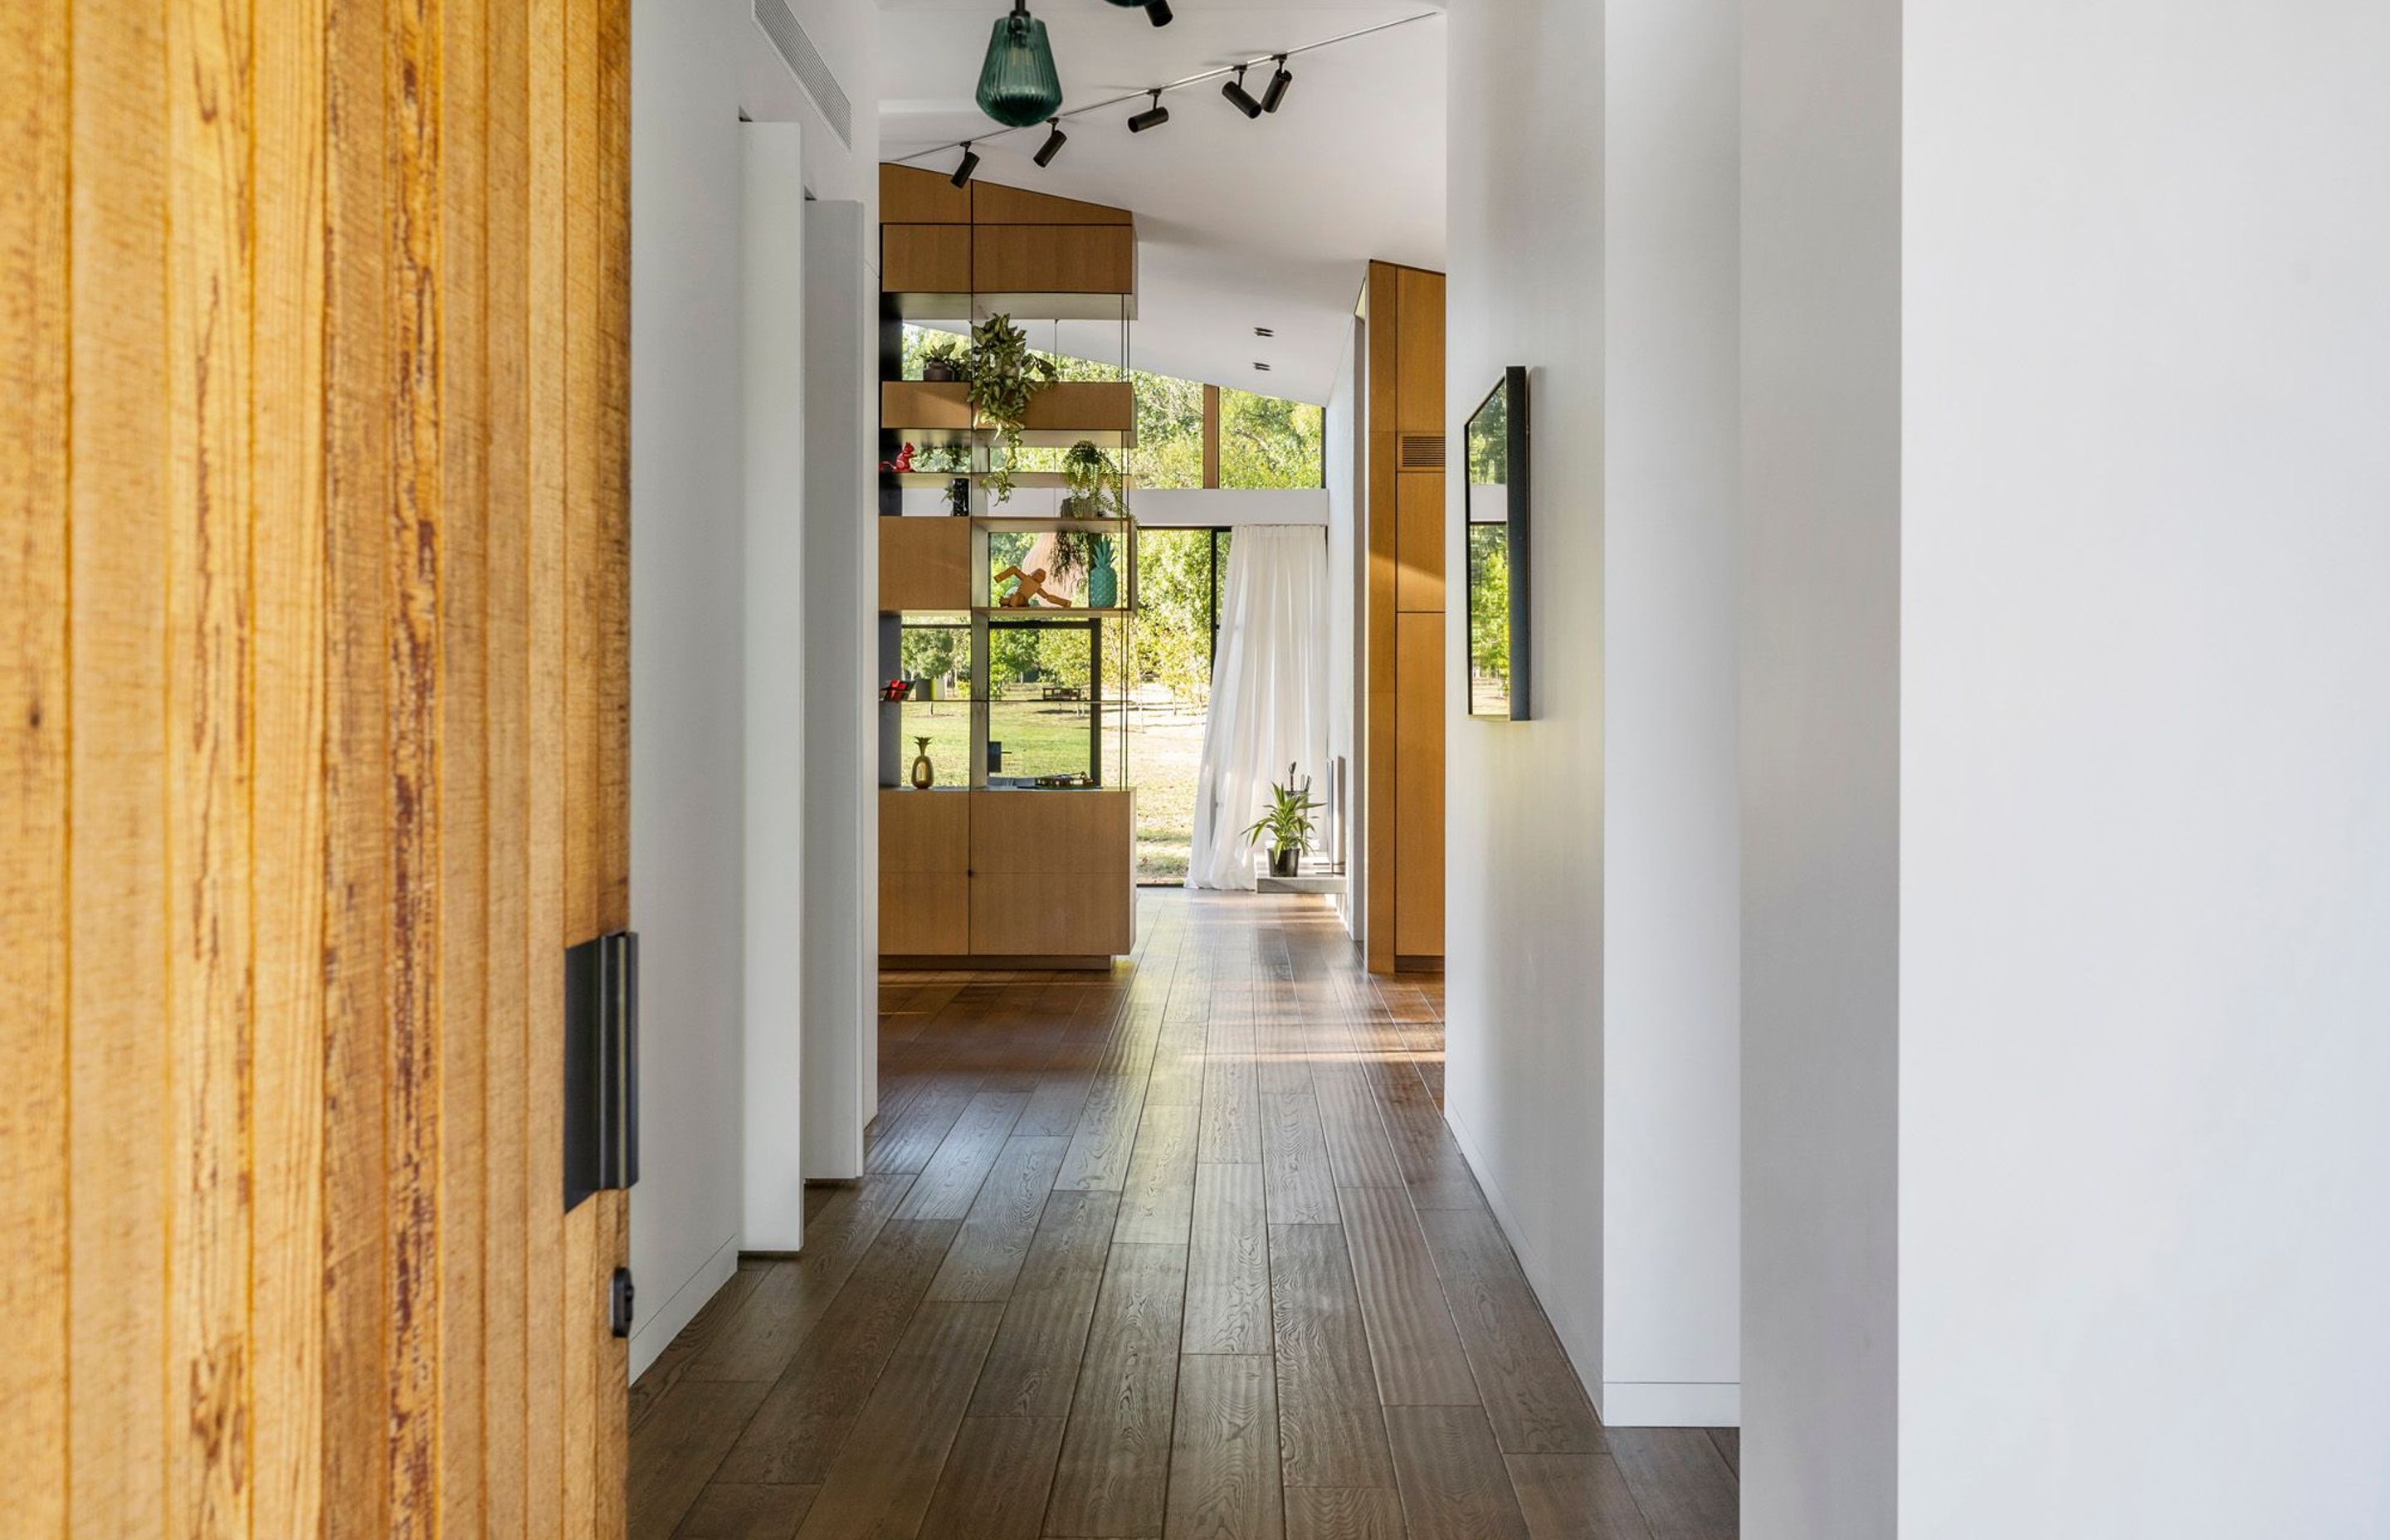 From the cedar front door, the view culminates in lush greenery at the other end of the house.